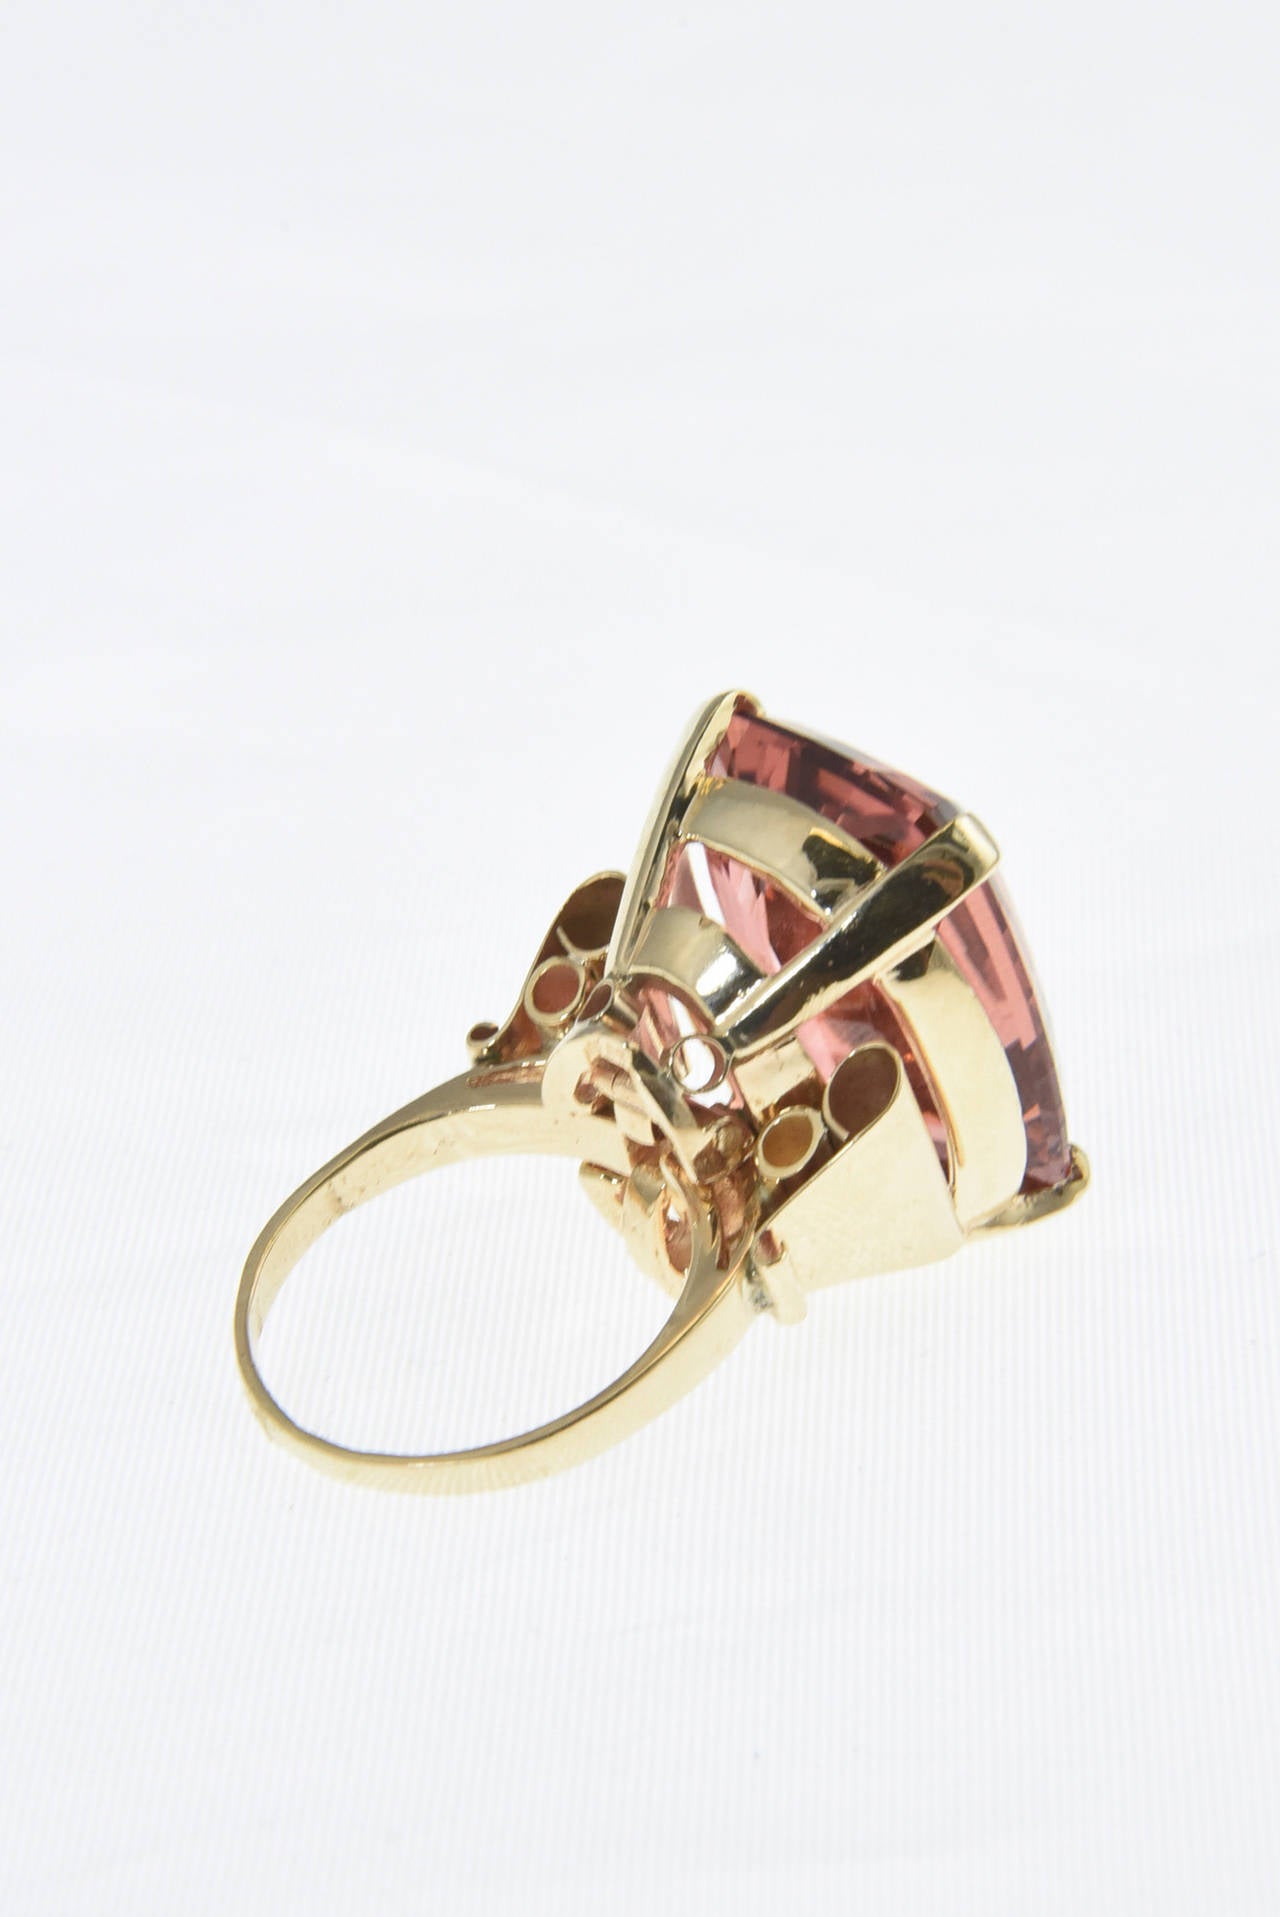 Large Rare Color Peach Pink Tourmaline Gold Cocktail Ring In Excellent Condition For Sale In Miami Beach, FL